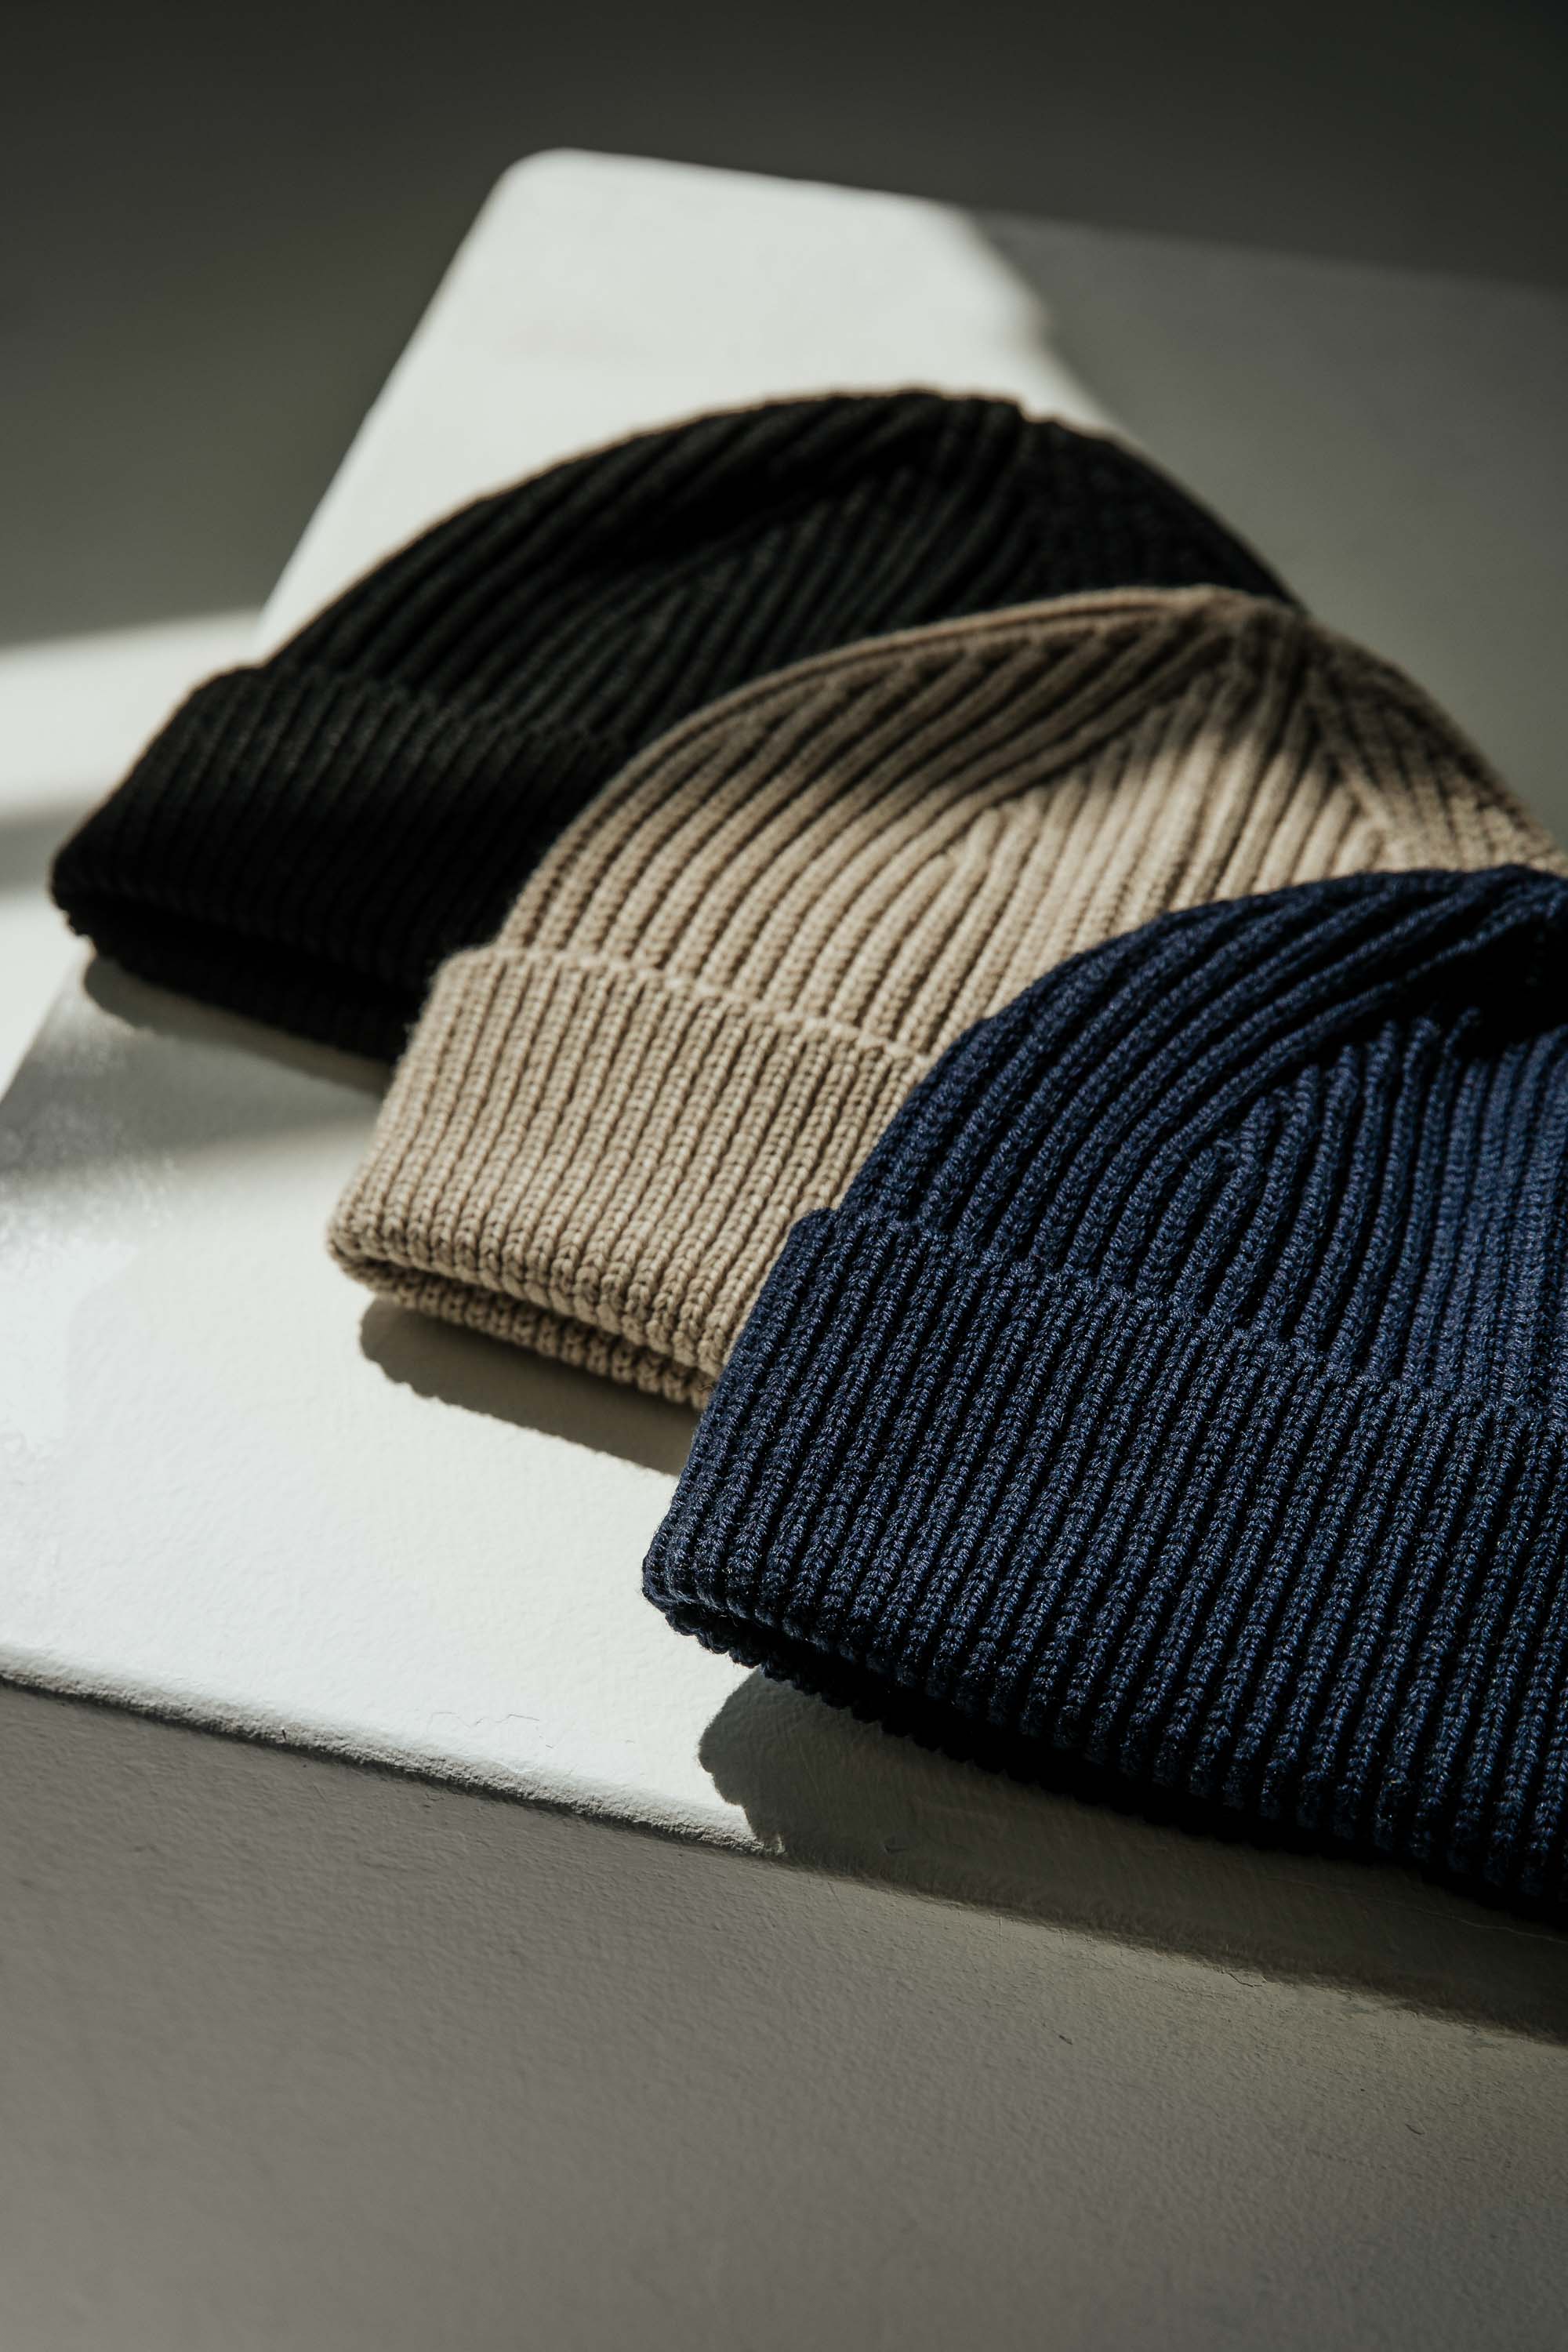 TUNØ Knitted Beanie Hat in Navy